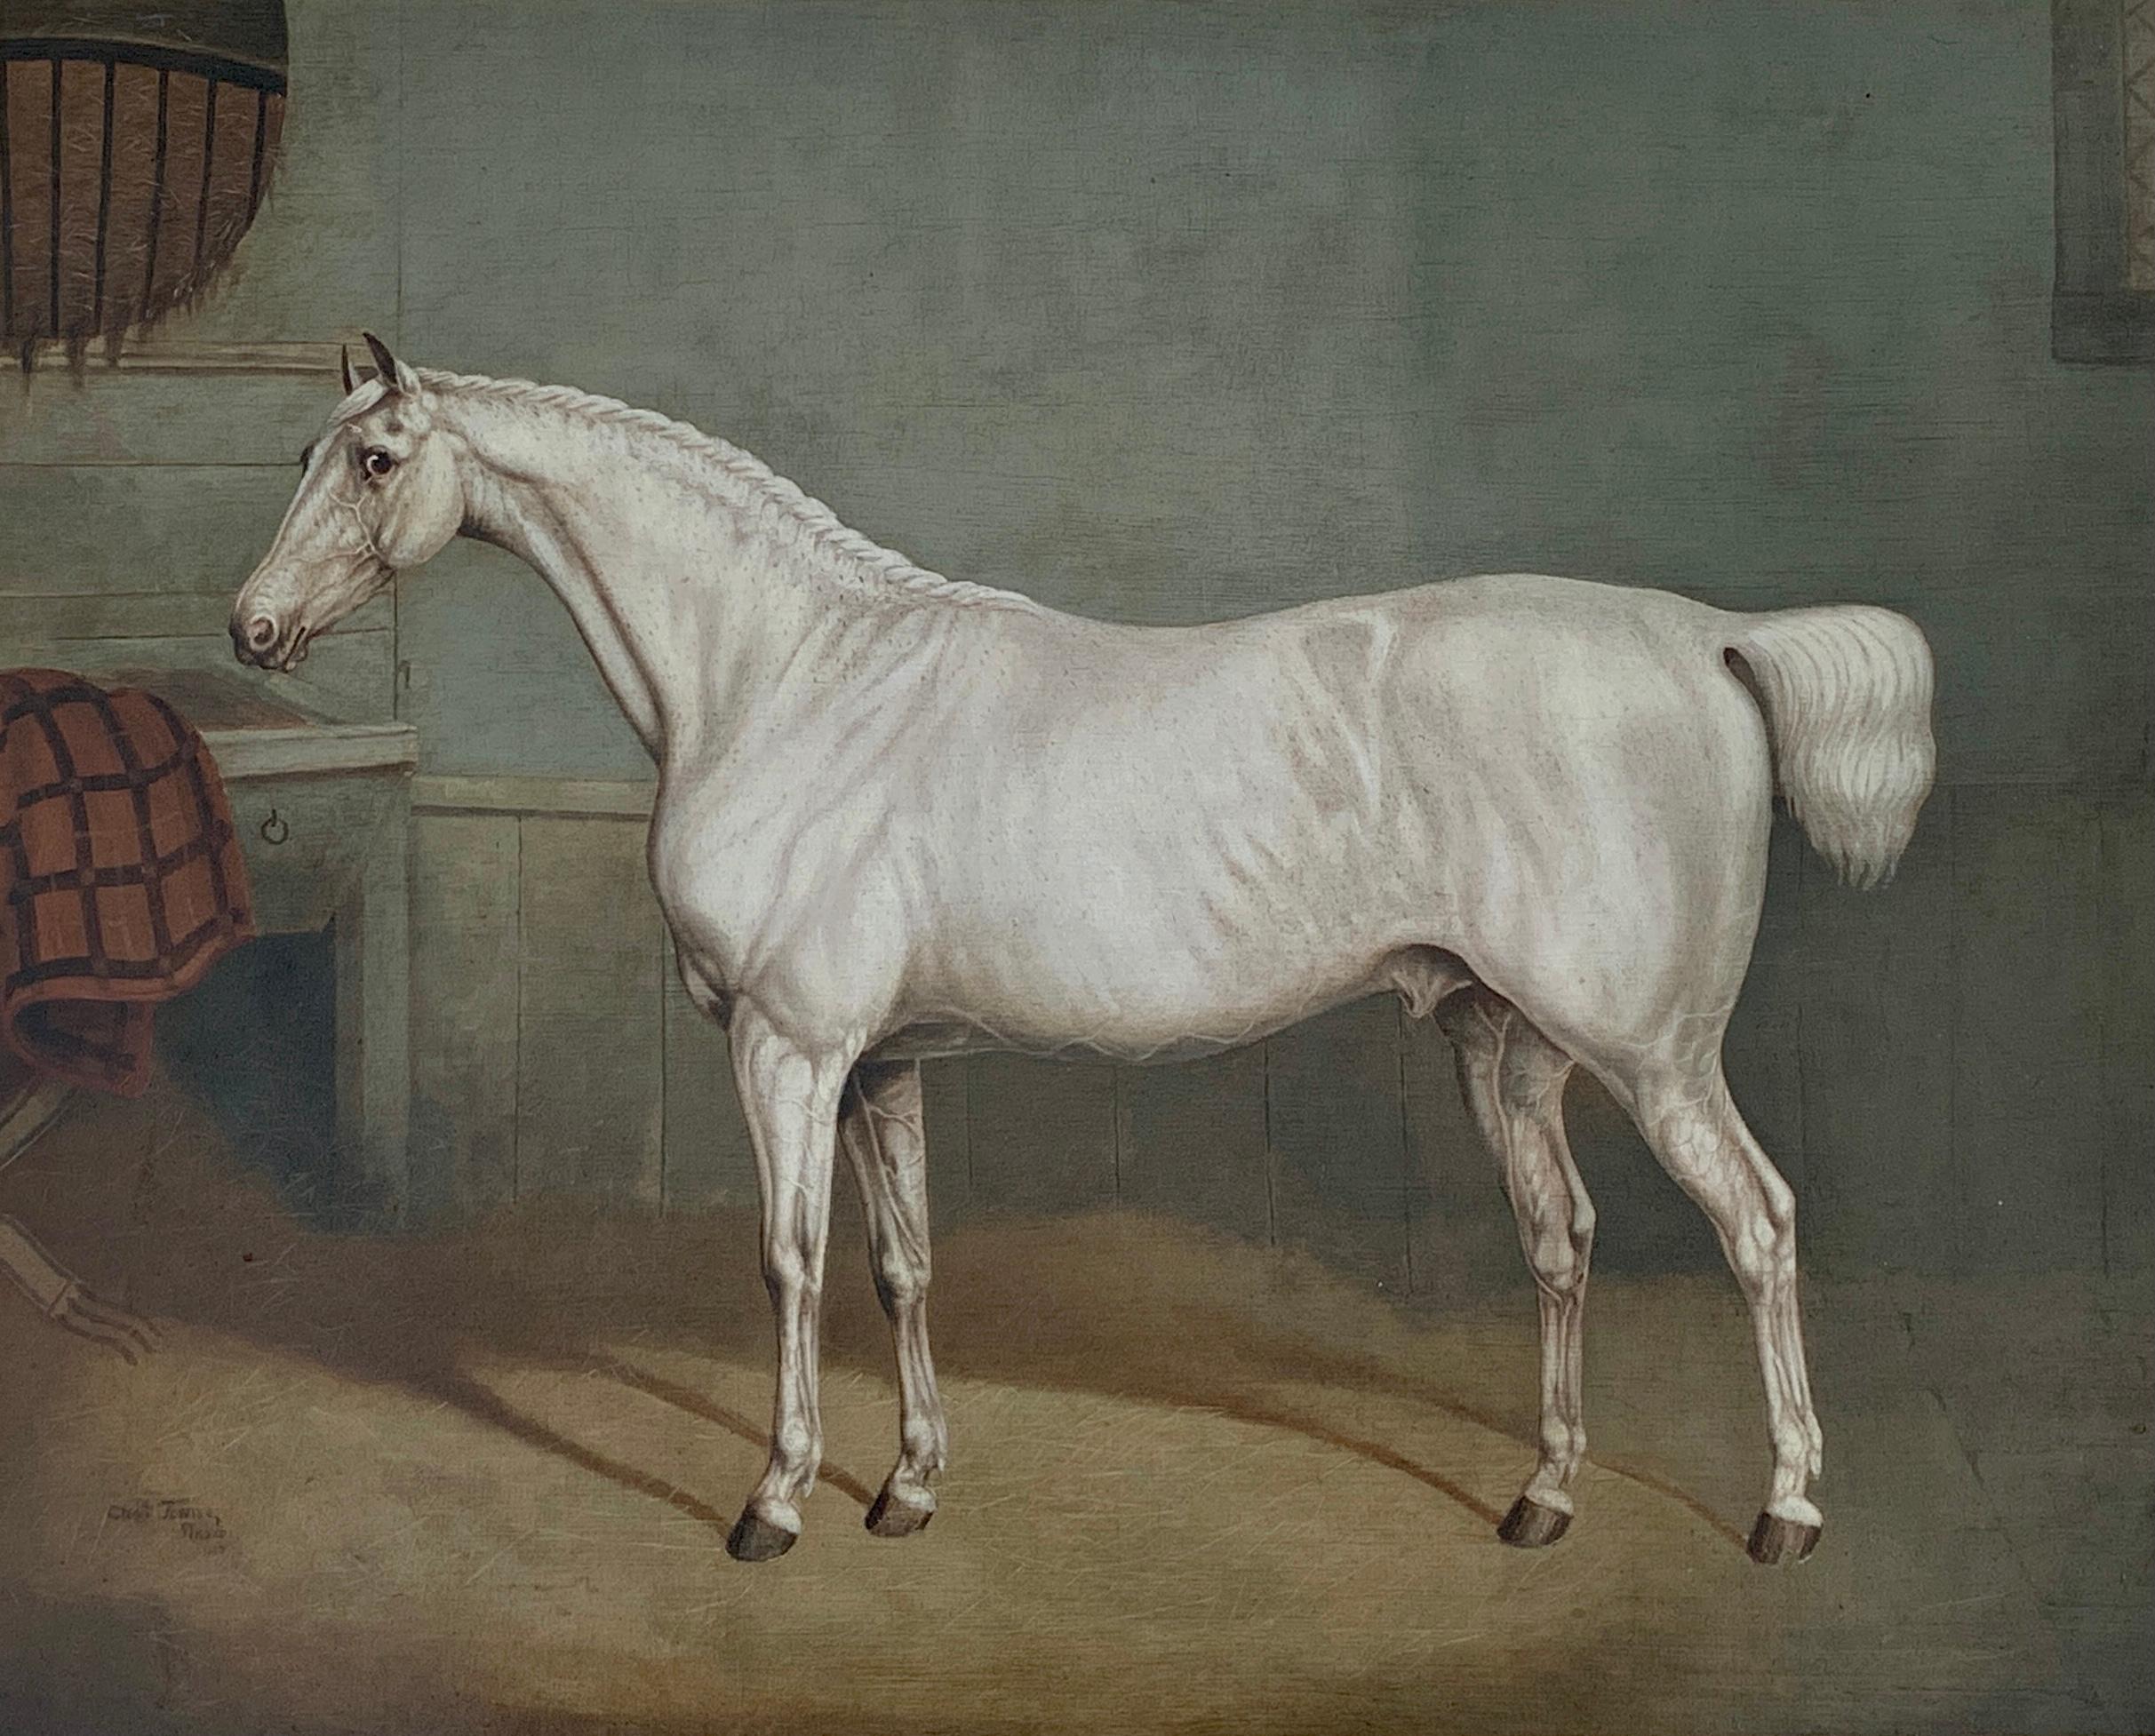 19th century English portrait of a White/grey hunter in a stable - Painting by Charles Towne